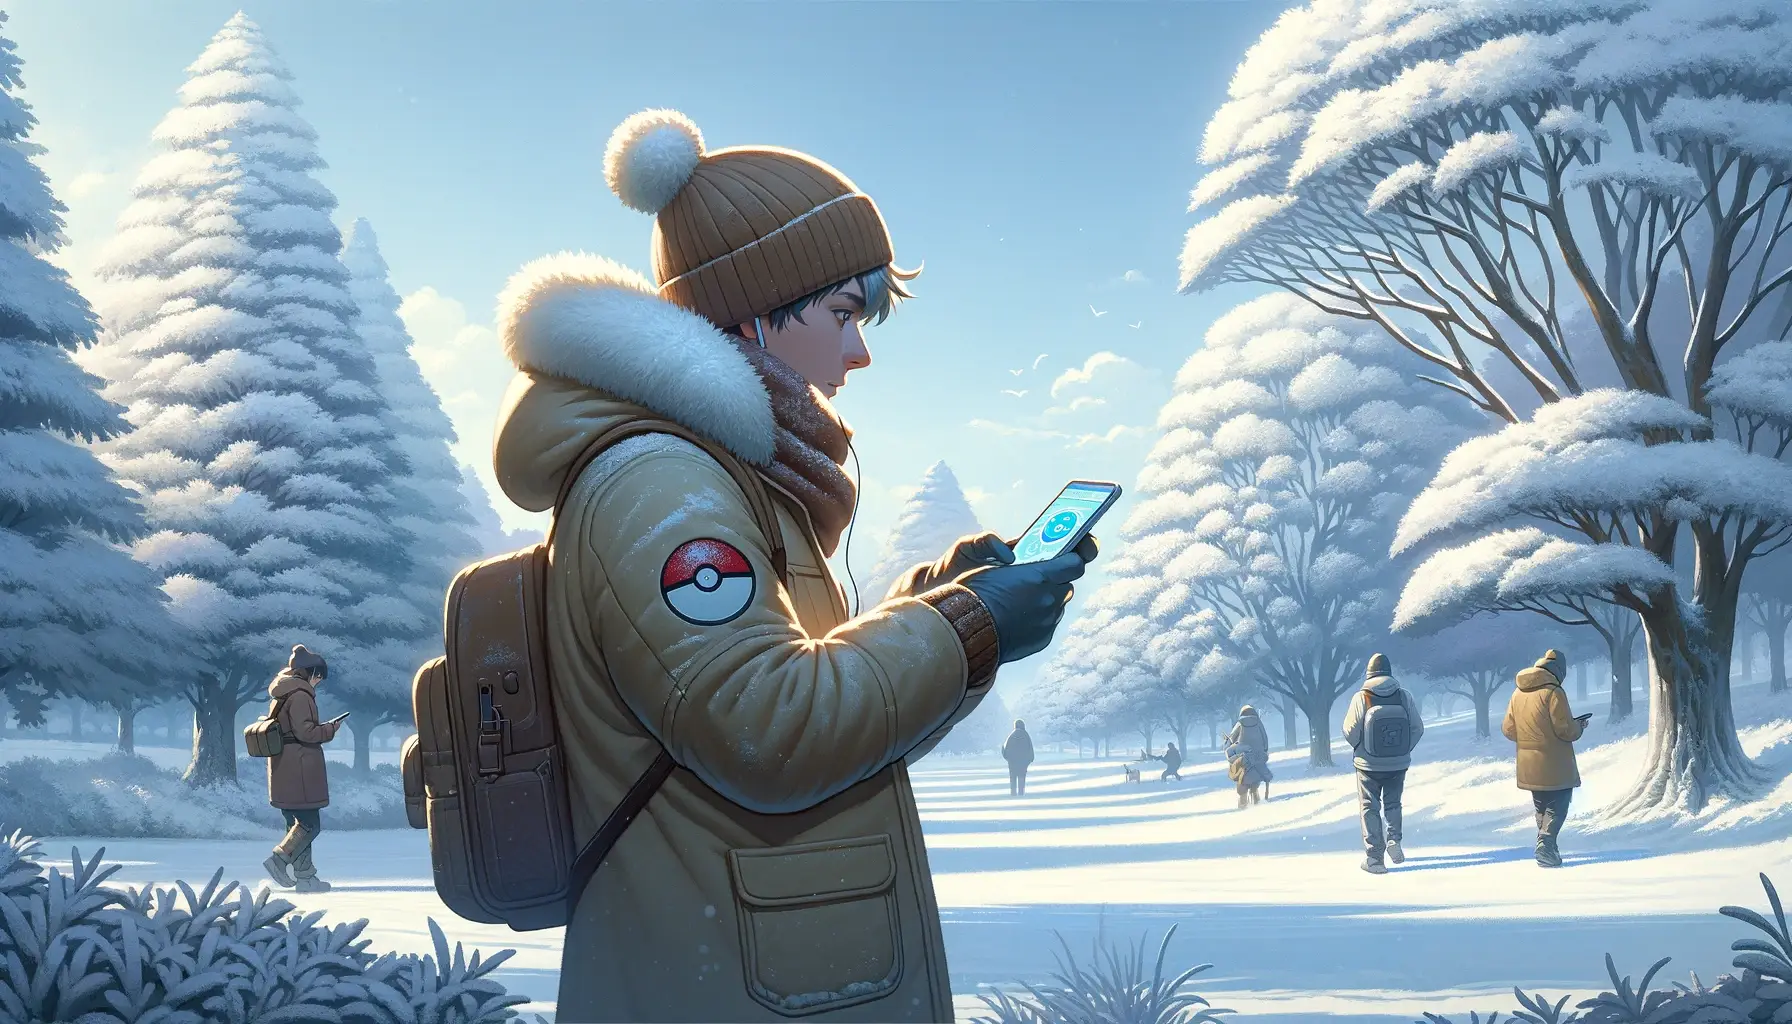 Tips for Playing Pokemon Go in the Winter Season